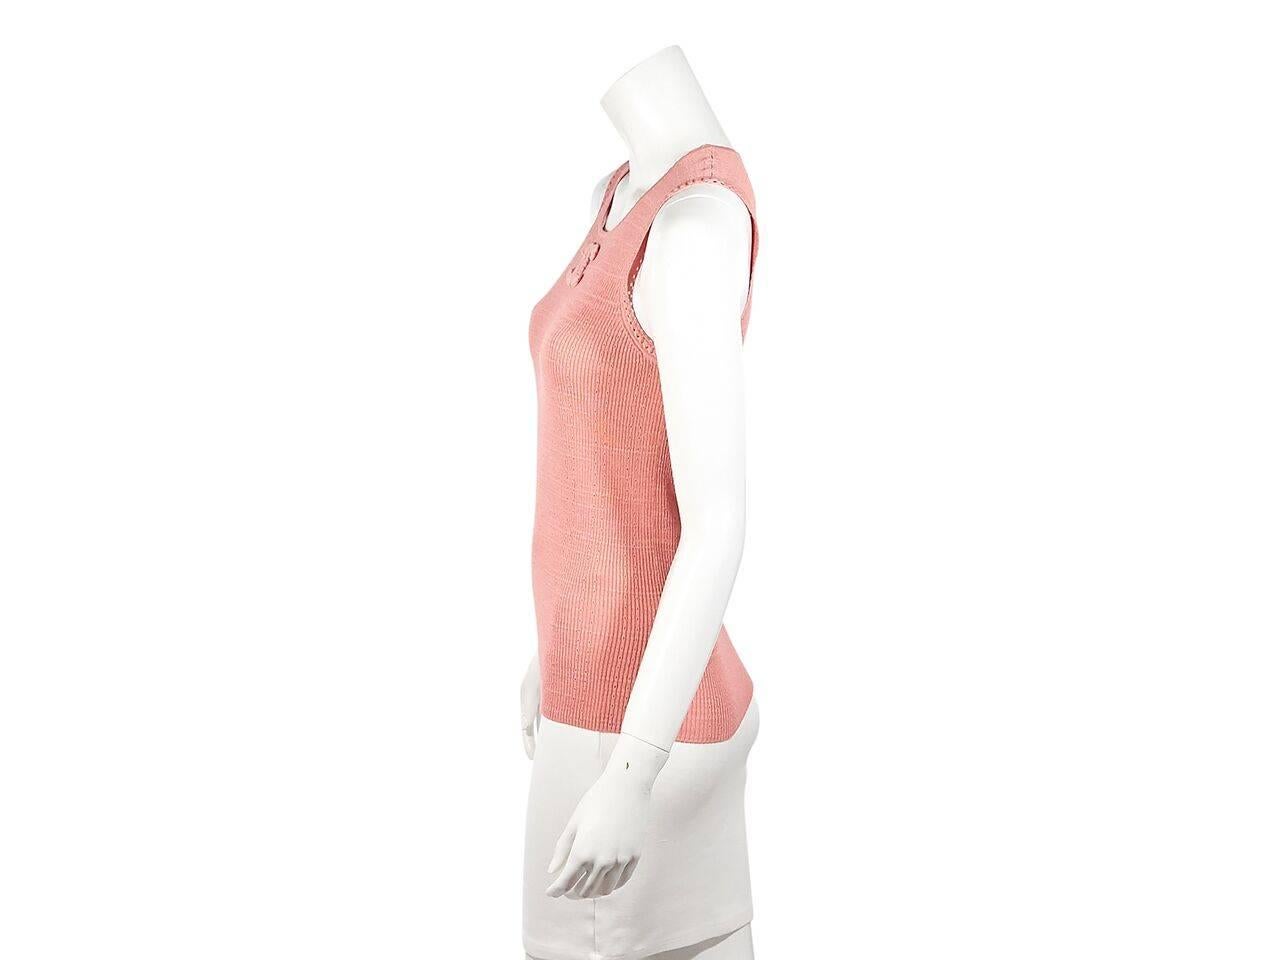 Product details:  Light coral cotton-blend knit top by Chanel.  Accented with a tonal logo applique.  Scoopneck.  Sleeveless.  Pullover style. 
Condition: Pre-owned. Very good.
Est. Retail $ 978.00